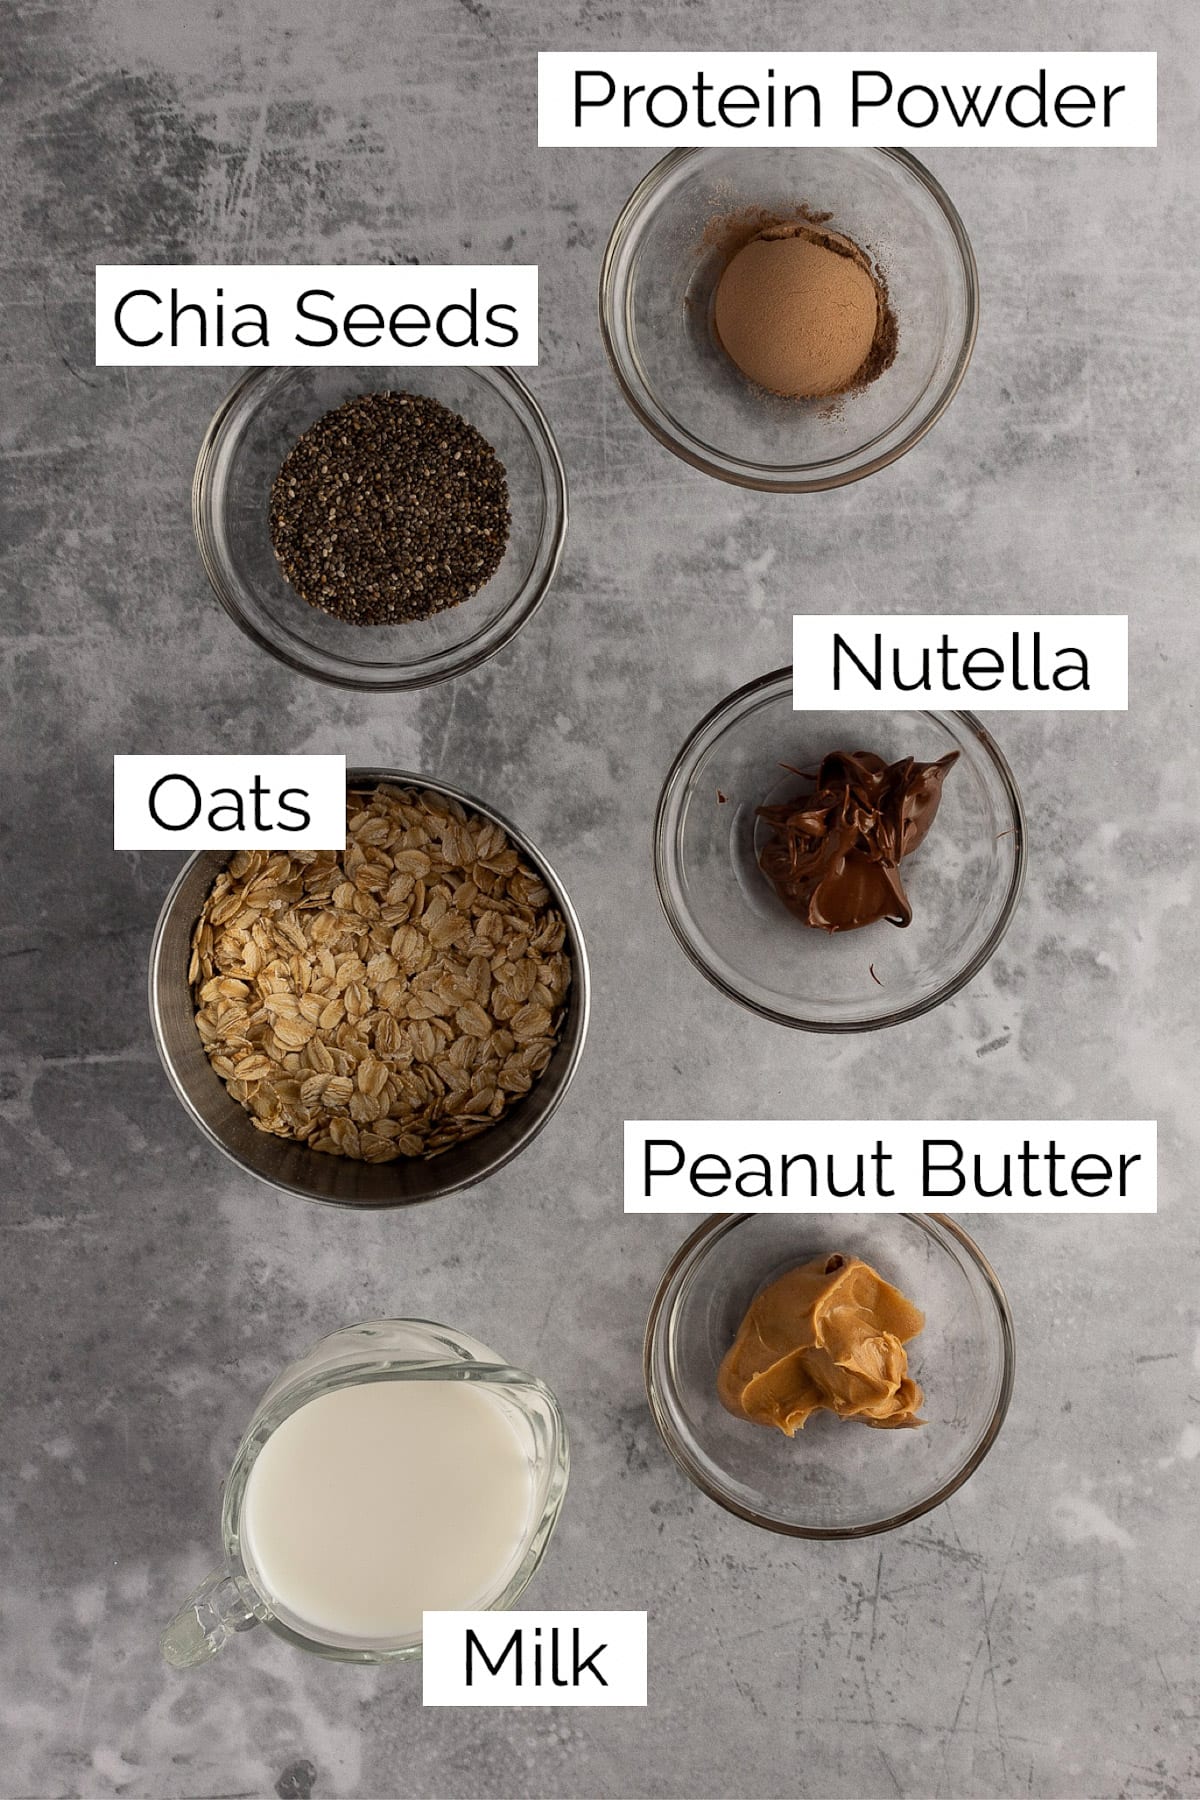 Overhead view of the ingredients needed to make the oats.